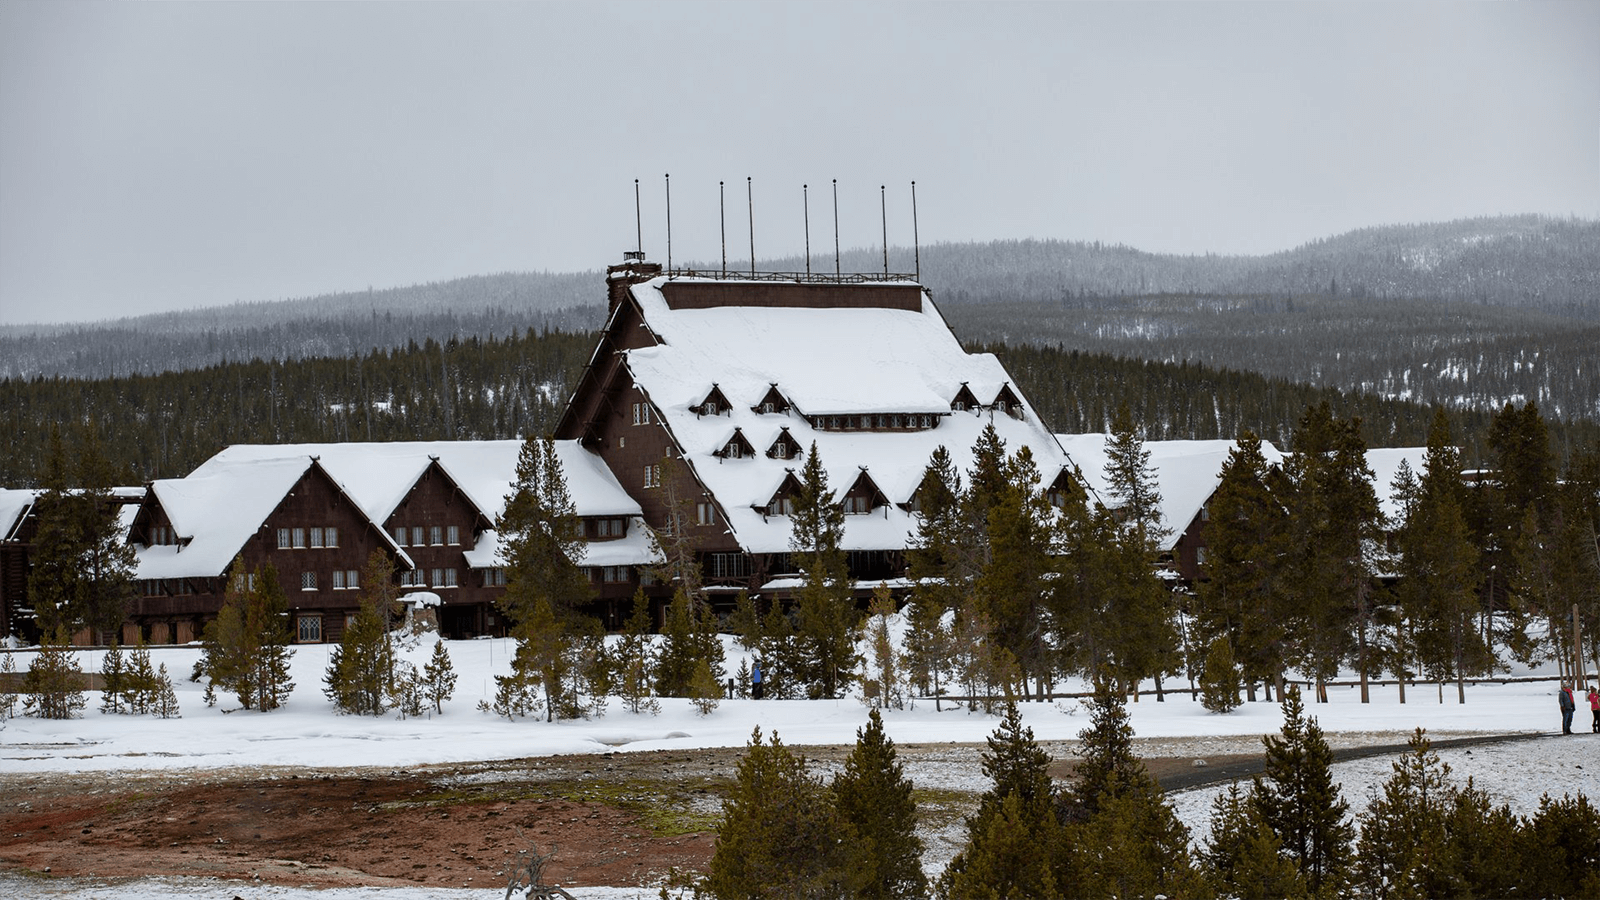 The Old Faithful Inn, a cozy lodge at Yellowstone, adorned with fresh snowfall.